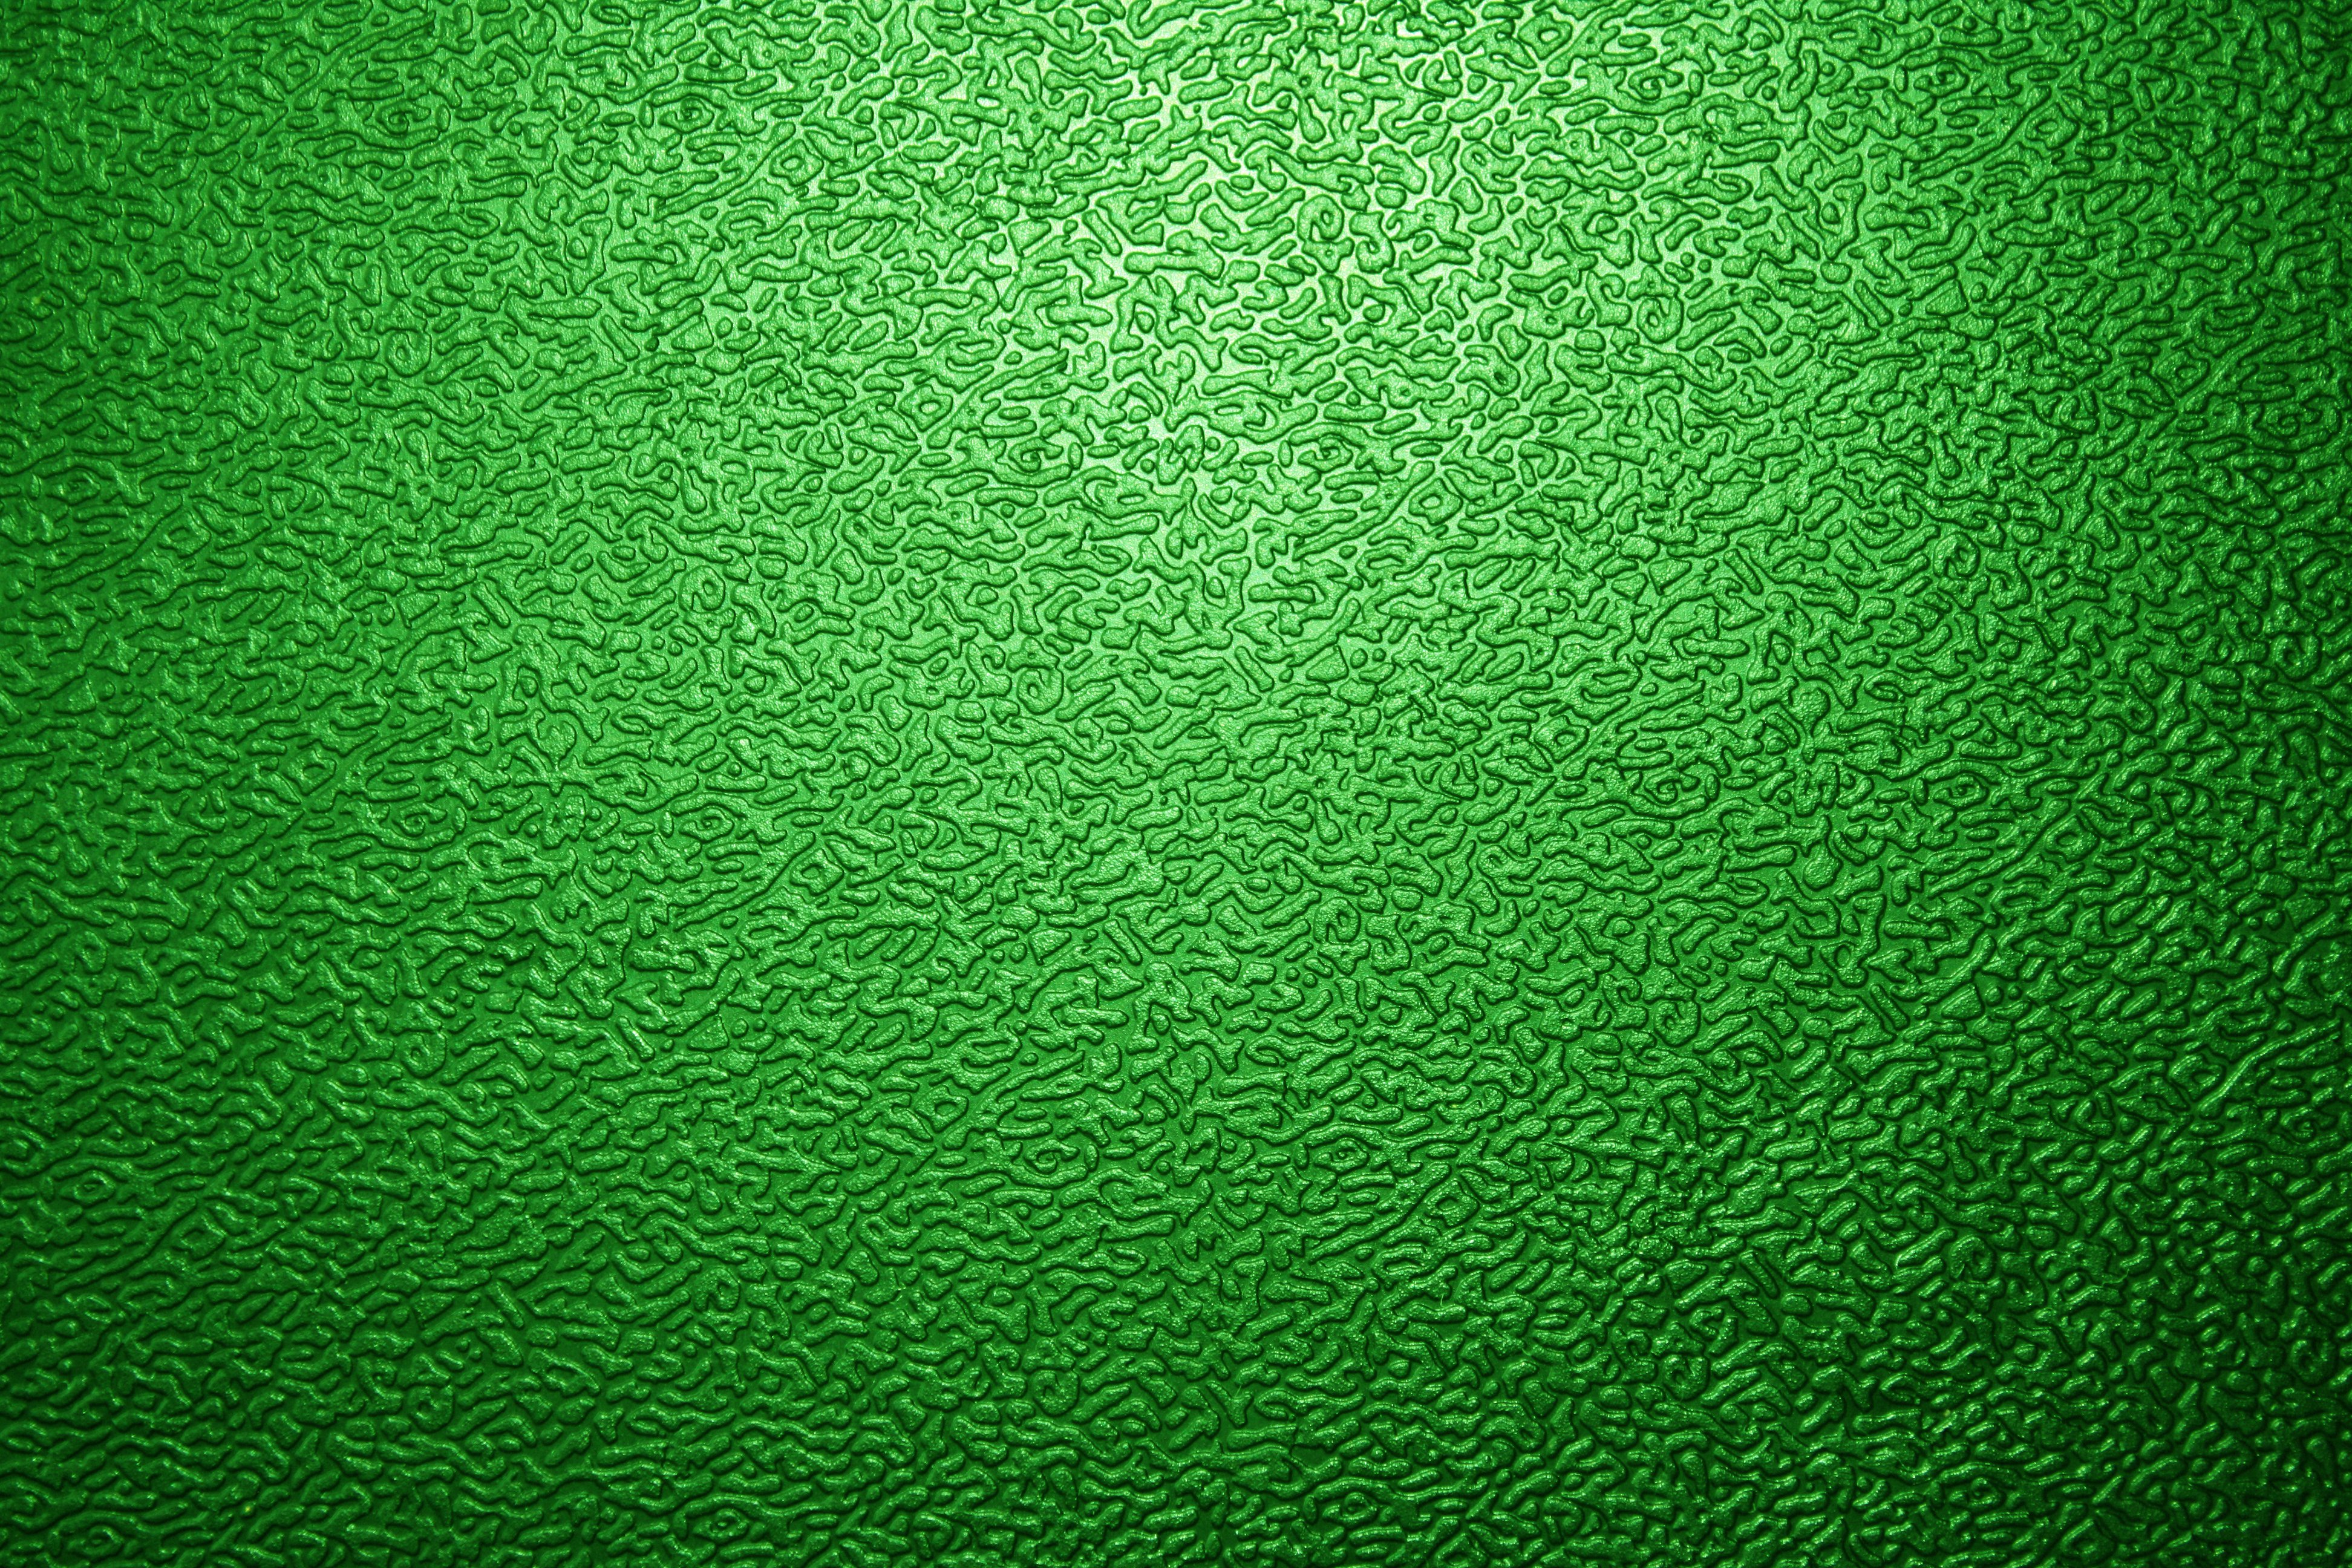 Textured Green Plastic Close Up Picture | Free Photograph | Photos